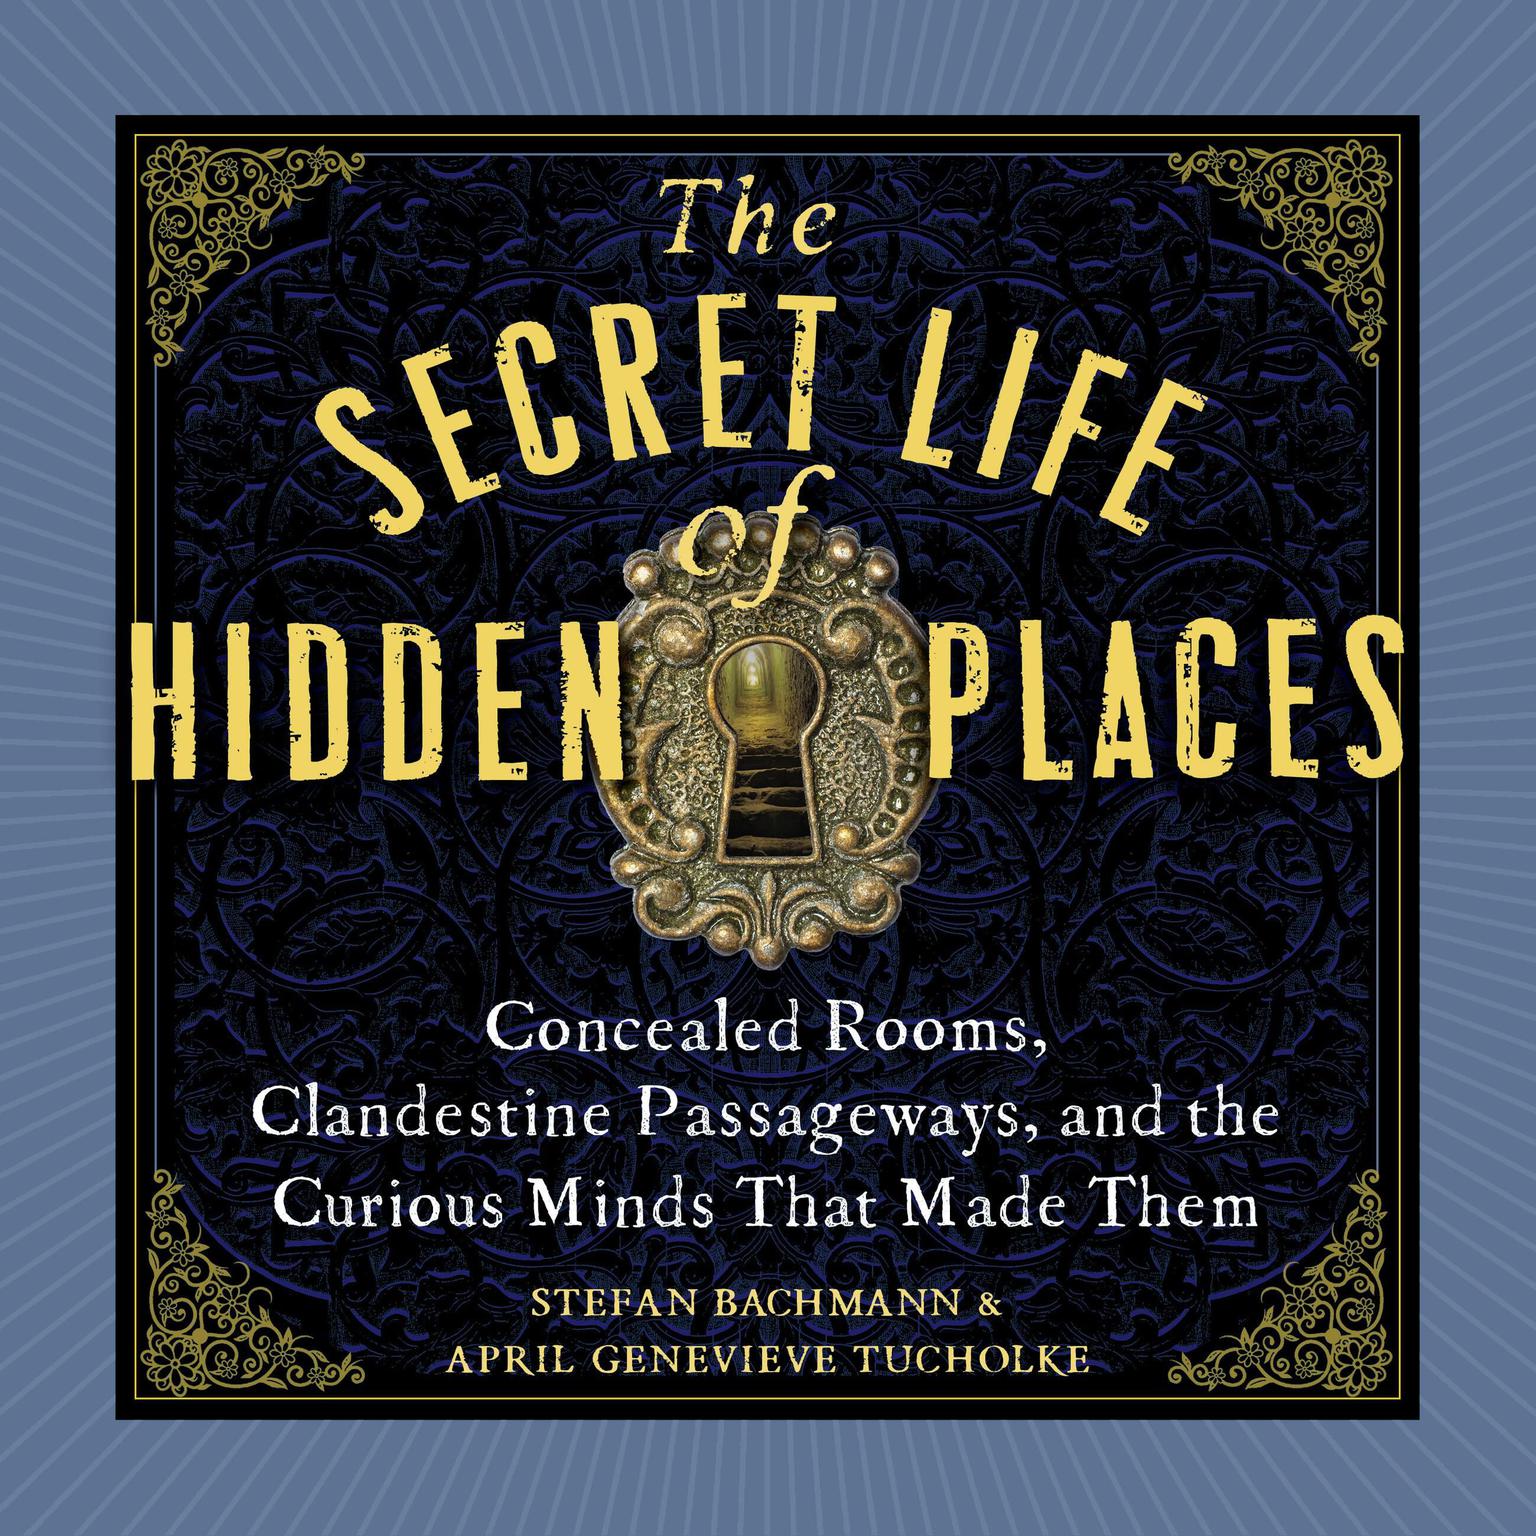 The Secret Life of Hidden Places: Concealed Rooms, Clandestine Passageways, and the Curious Minds That Made Them Audiobook, by Stefan Bachmann